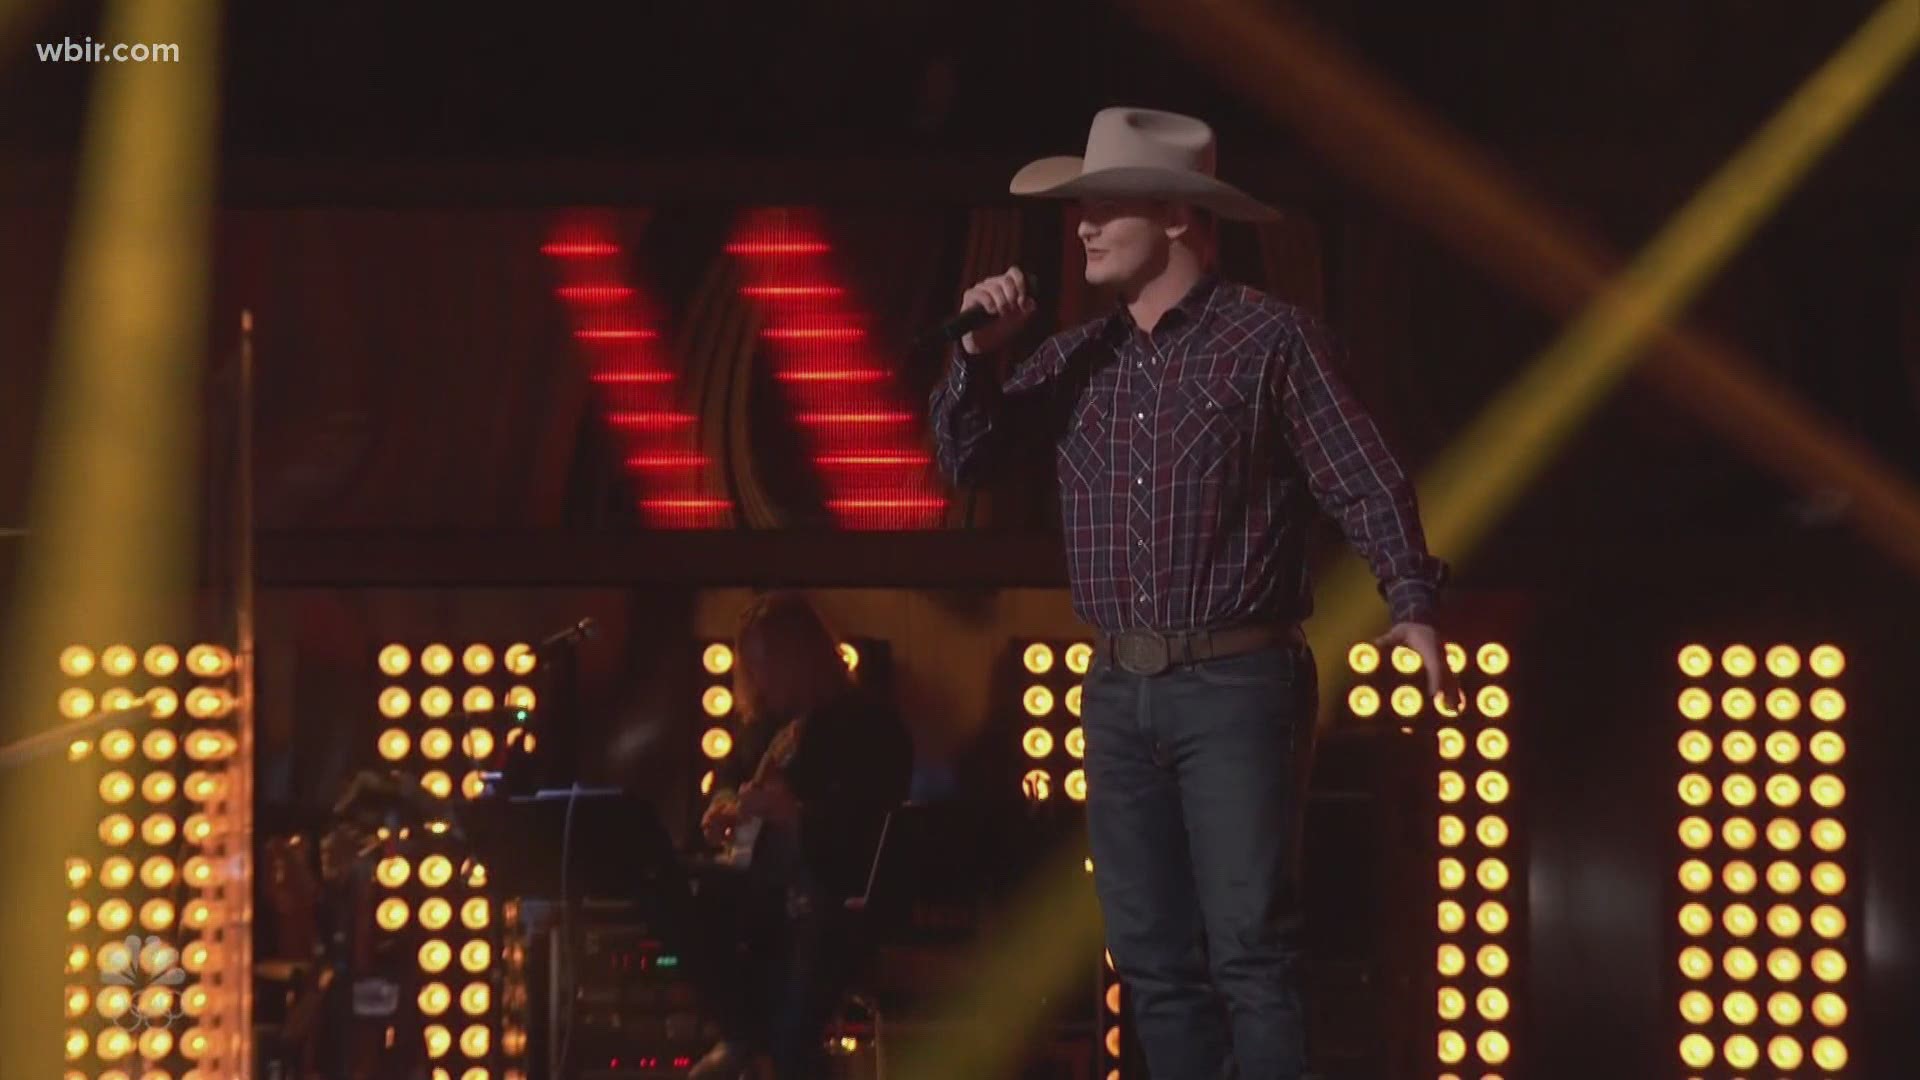 They call him the "Tender Cowboy": 17-year-old Ethan Lively is representing East Tennessee on NBC's The Voice this season!